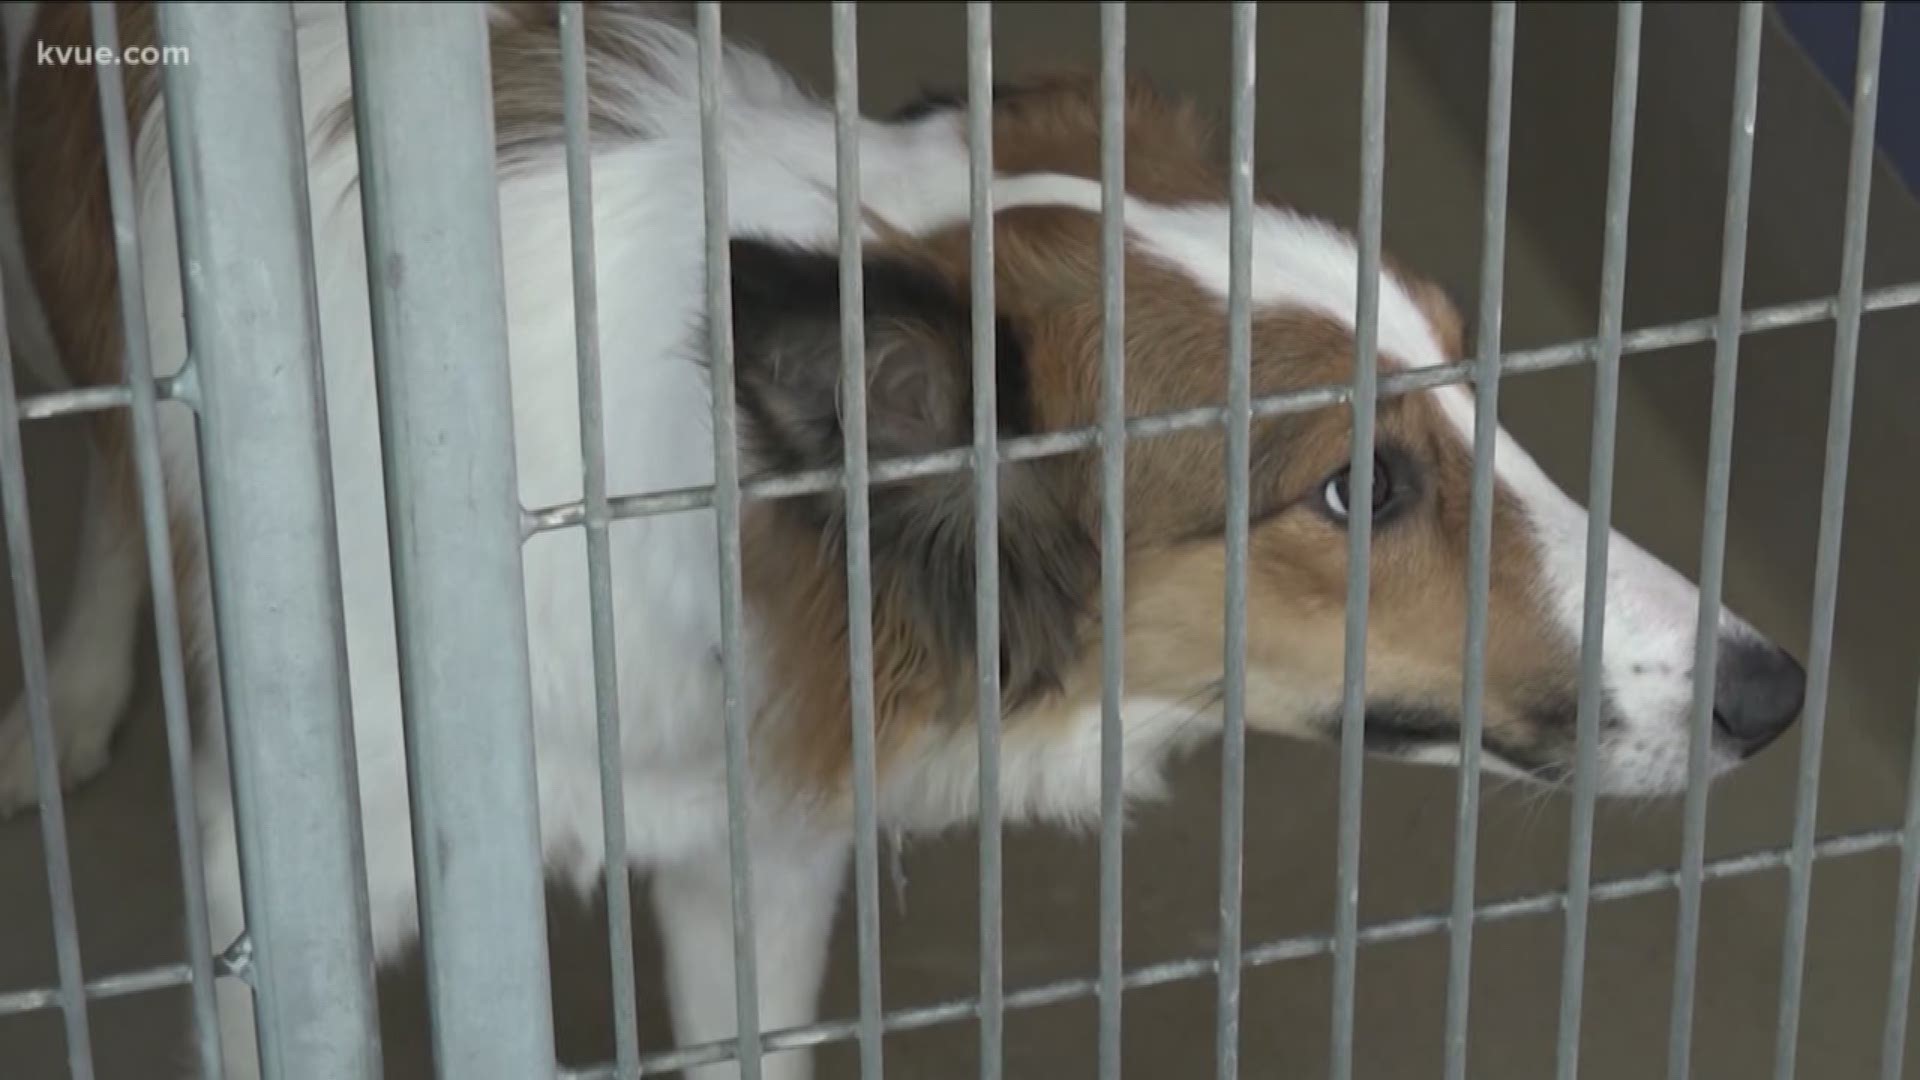 There could be a new law soon that would step up punishments for animal abusers.